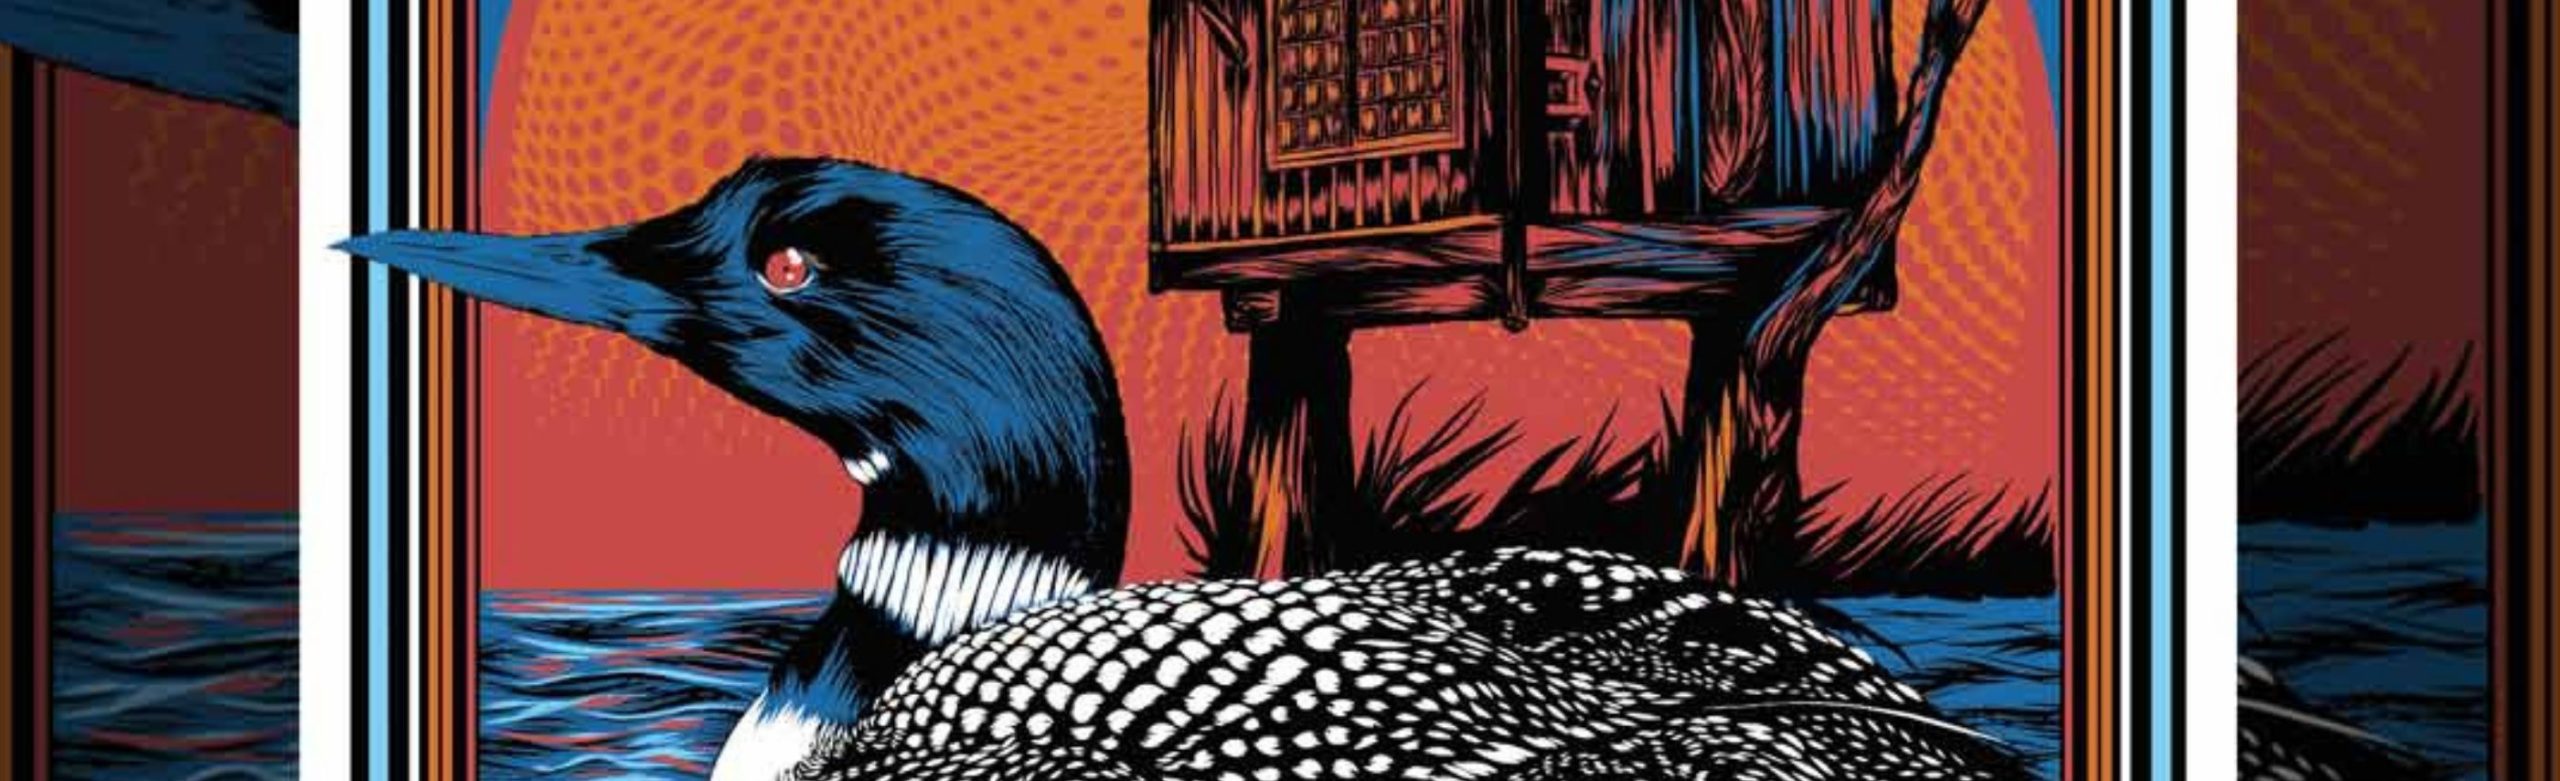 Custom Limited Edition Screenprint for Trampled By Turtles at KettleHouse Amphitheater 2019 Image